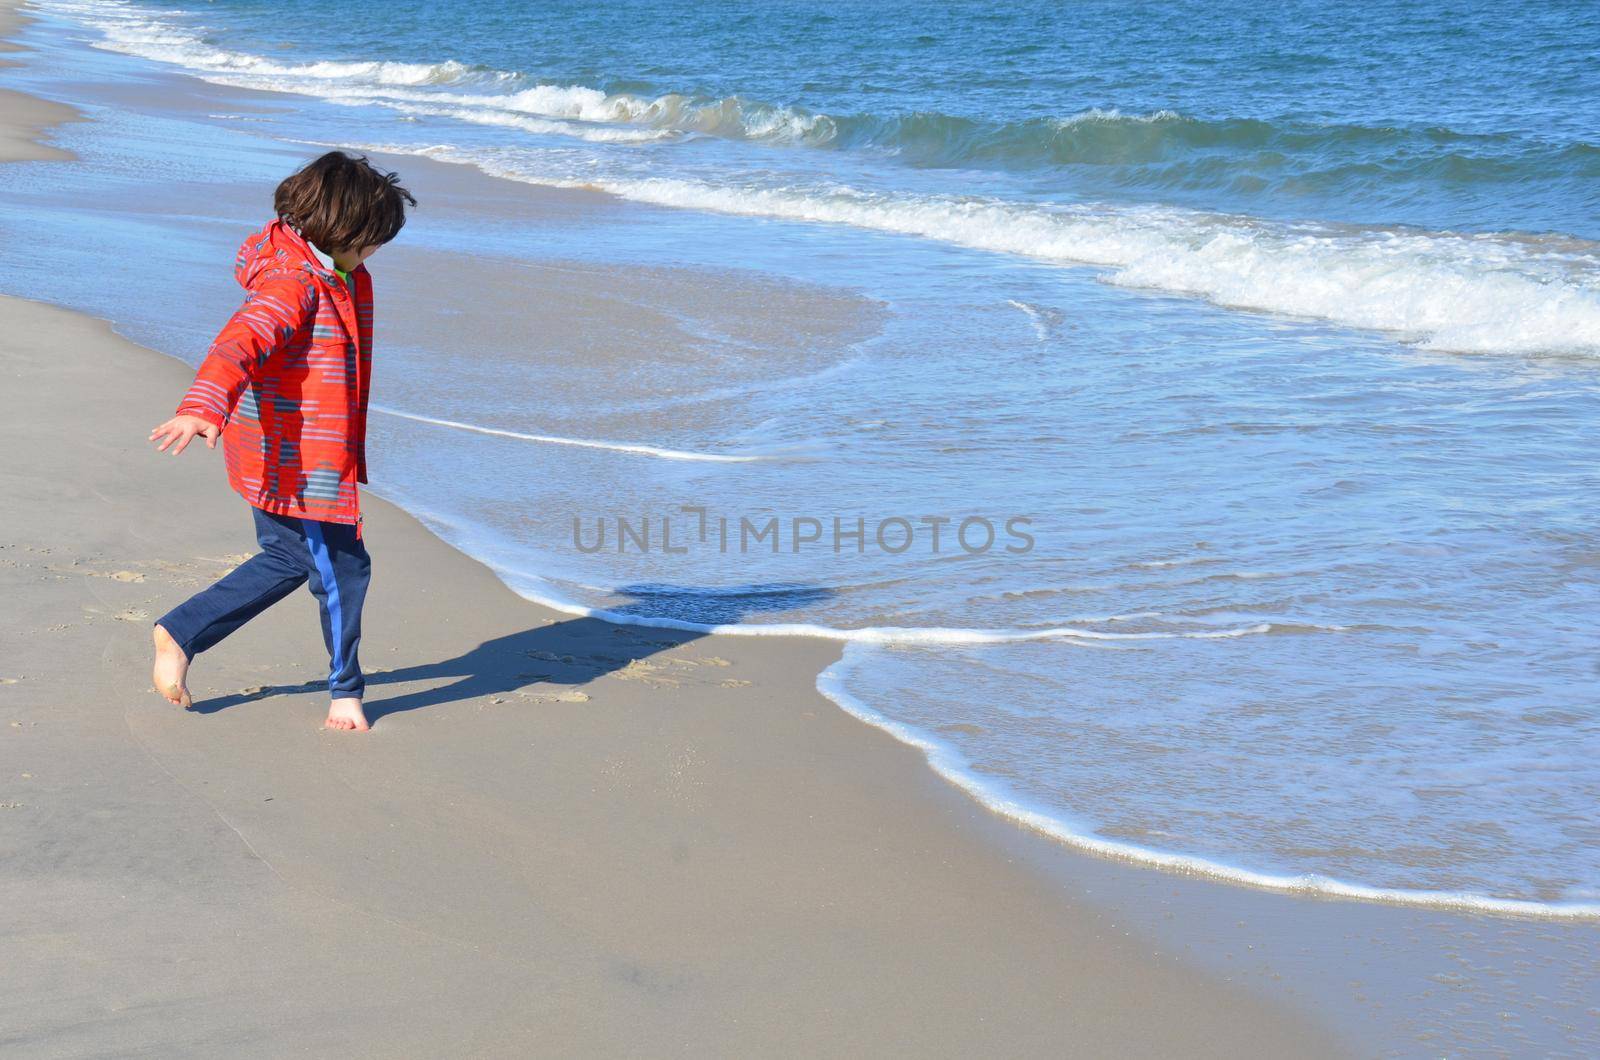 boy in red jacket and beach with water and sand and waves